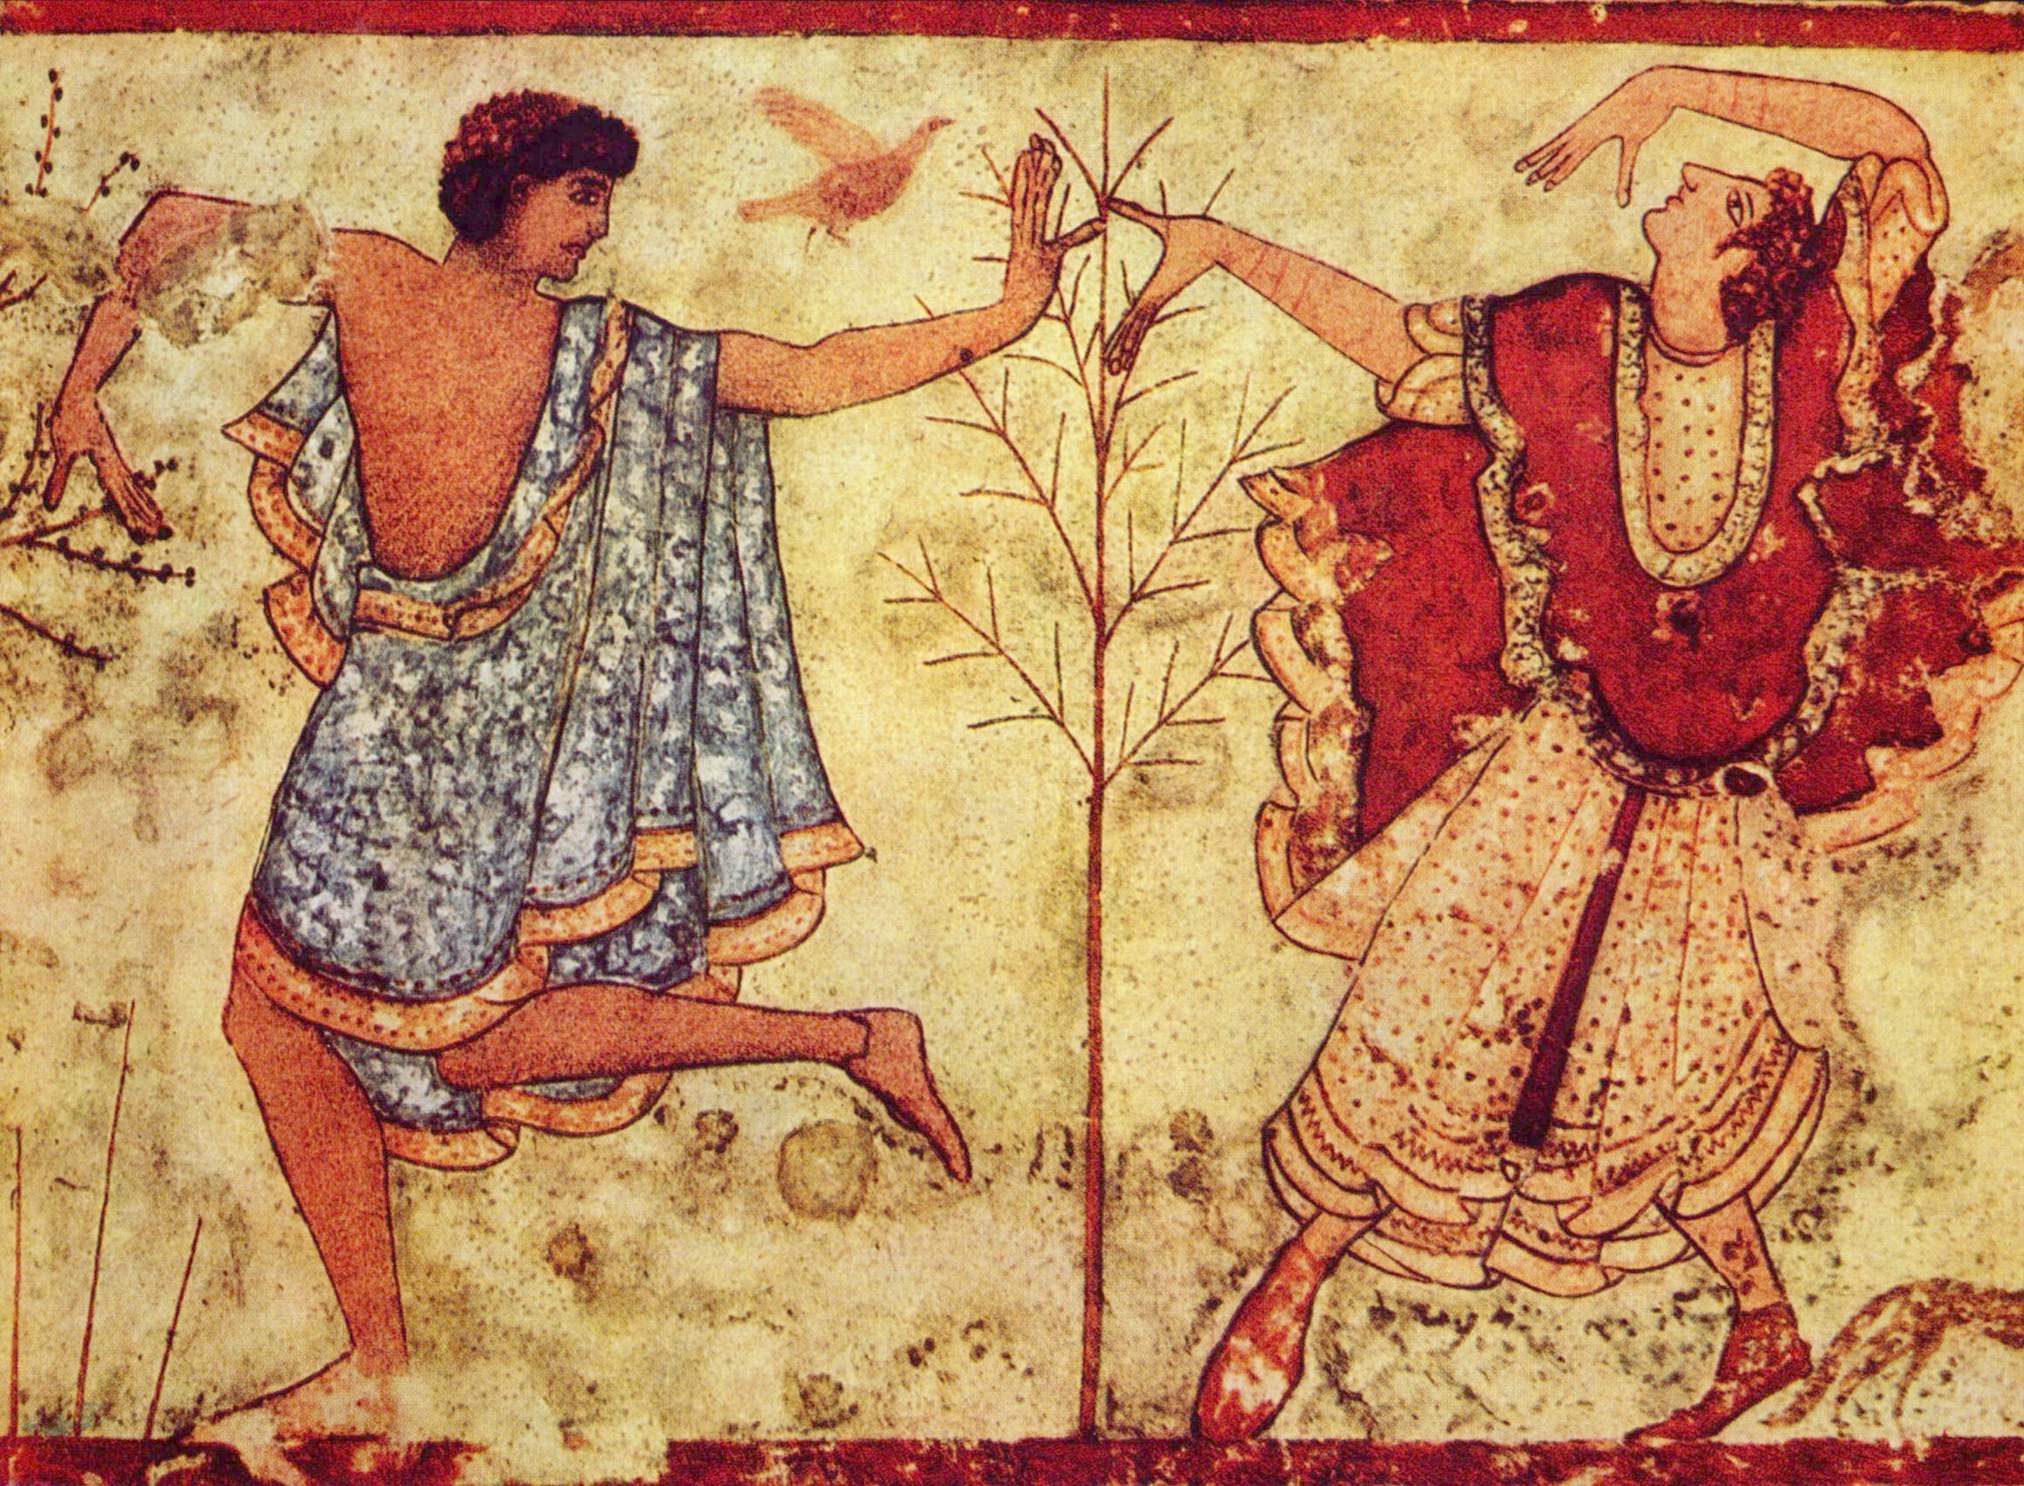 The sophisticated Etruscans: A man and a woman dancing in colorful garb - part of an Etruscan funerary wall painting in the Tomb of the Triclinium (470-440 BCE). The wall painting was moved from the Necropoli dei Monterozzi, to the National Etruscan Museum - Tarquinia, Italy. Ref: (a-v).